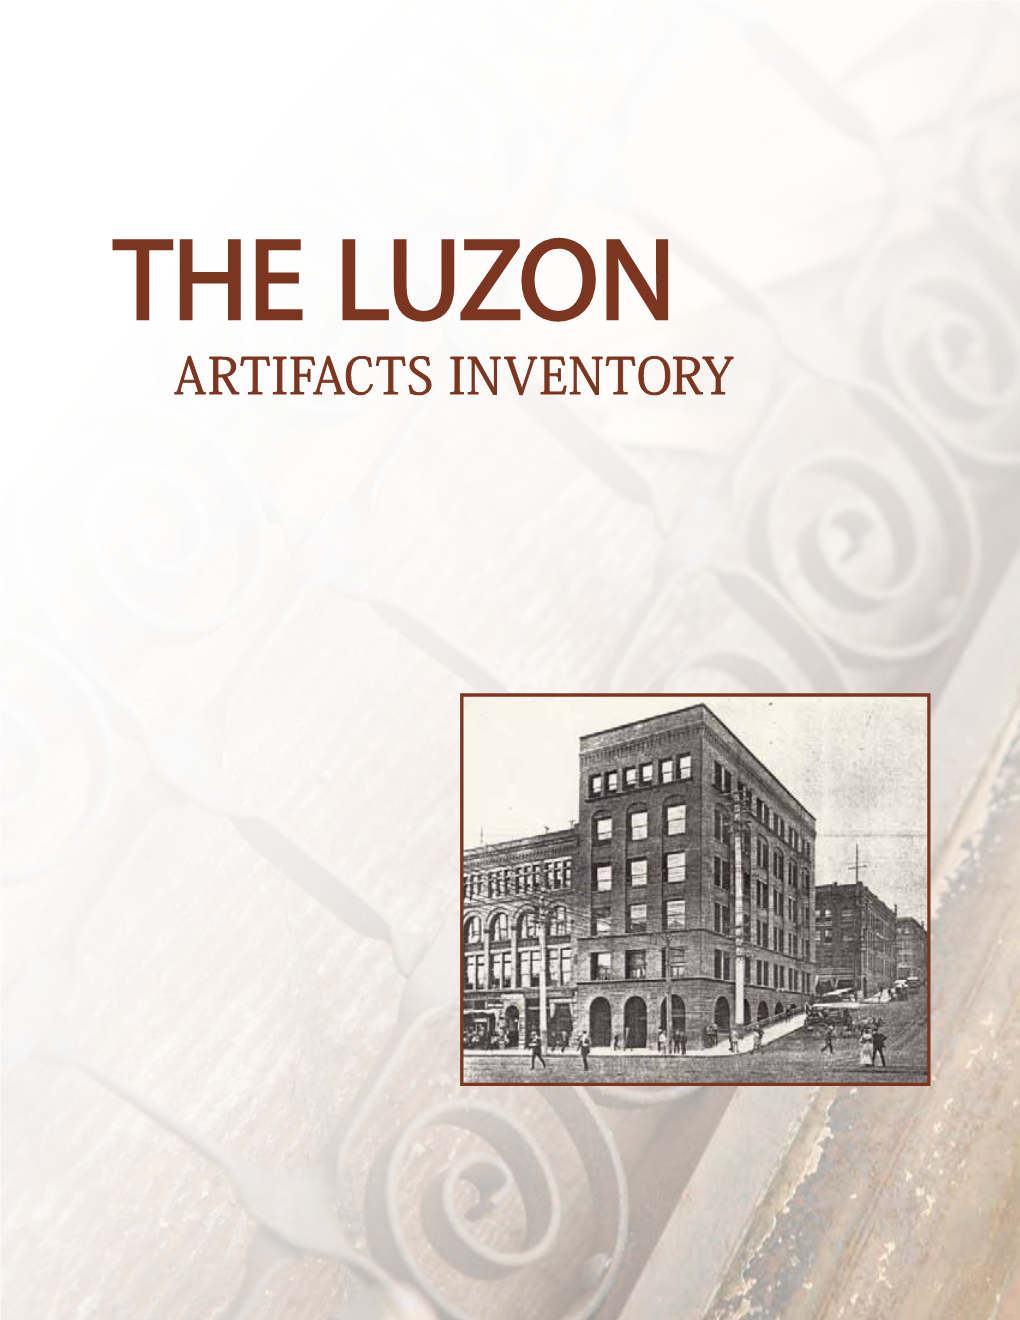 Luzon Artifacts Inventory Publishing Data This Study Commissioned and Published by the City of Tacoma in August of 2011